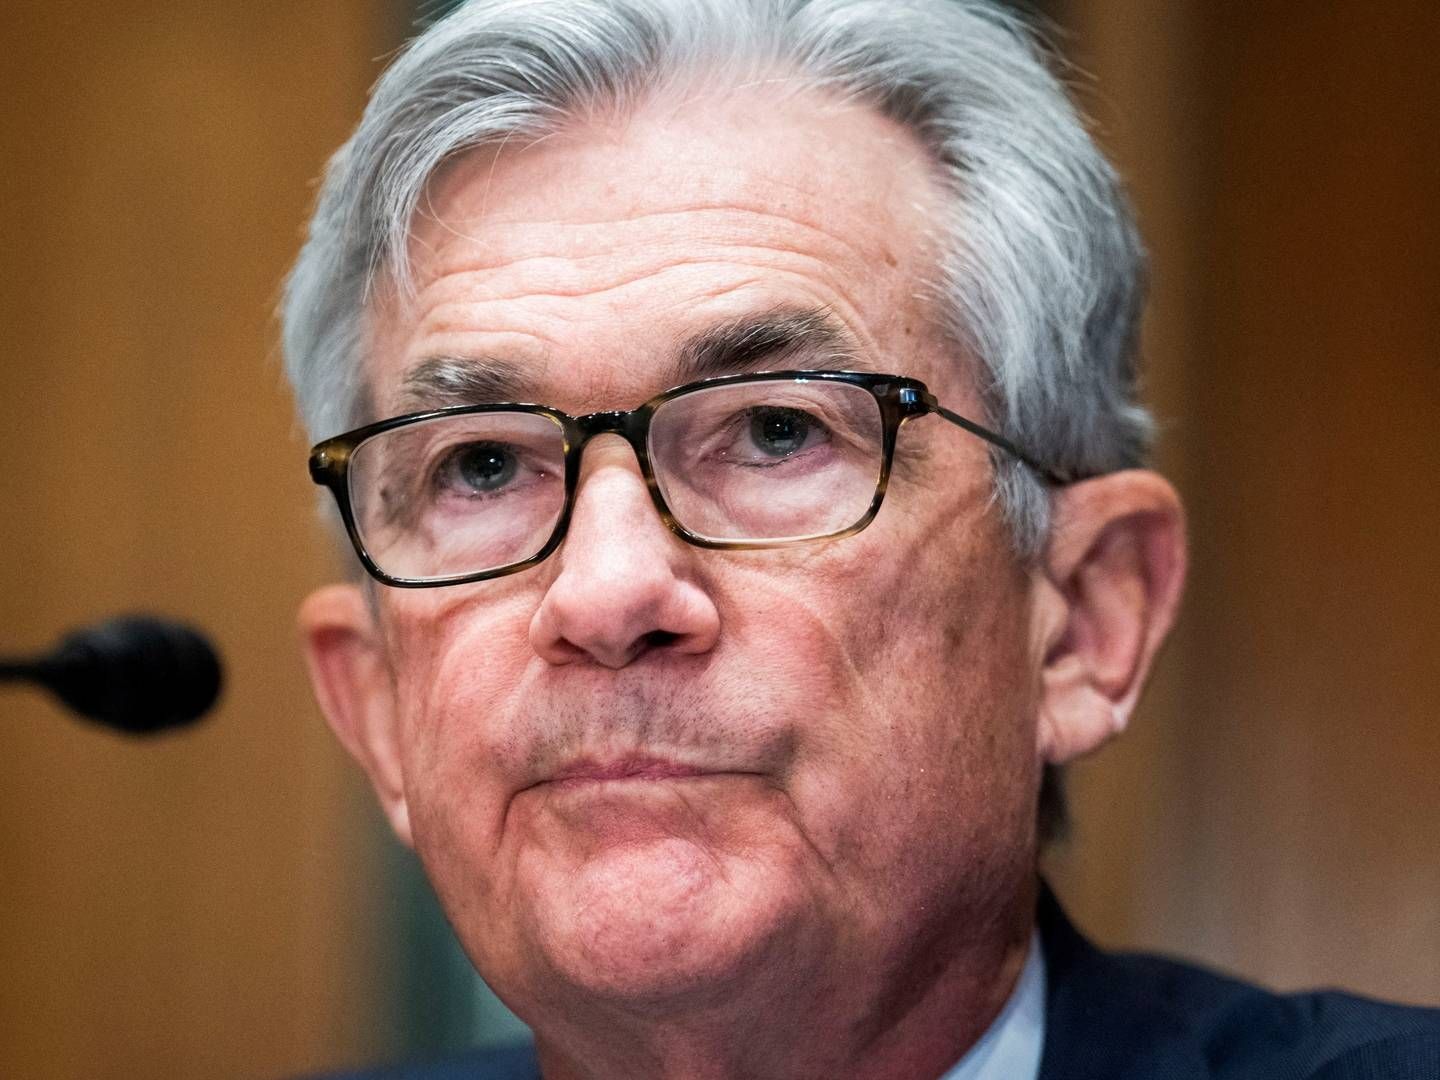 Jerome Powell, formand for den amerikanske centralbank, Federal Reserve. | Foto: POOL/REUTERS / X80003